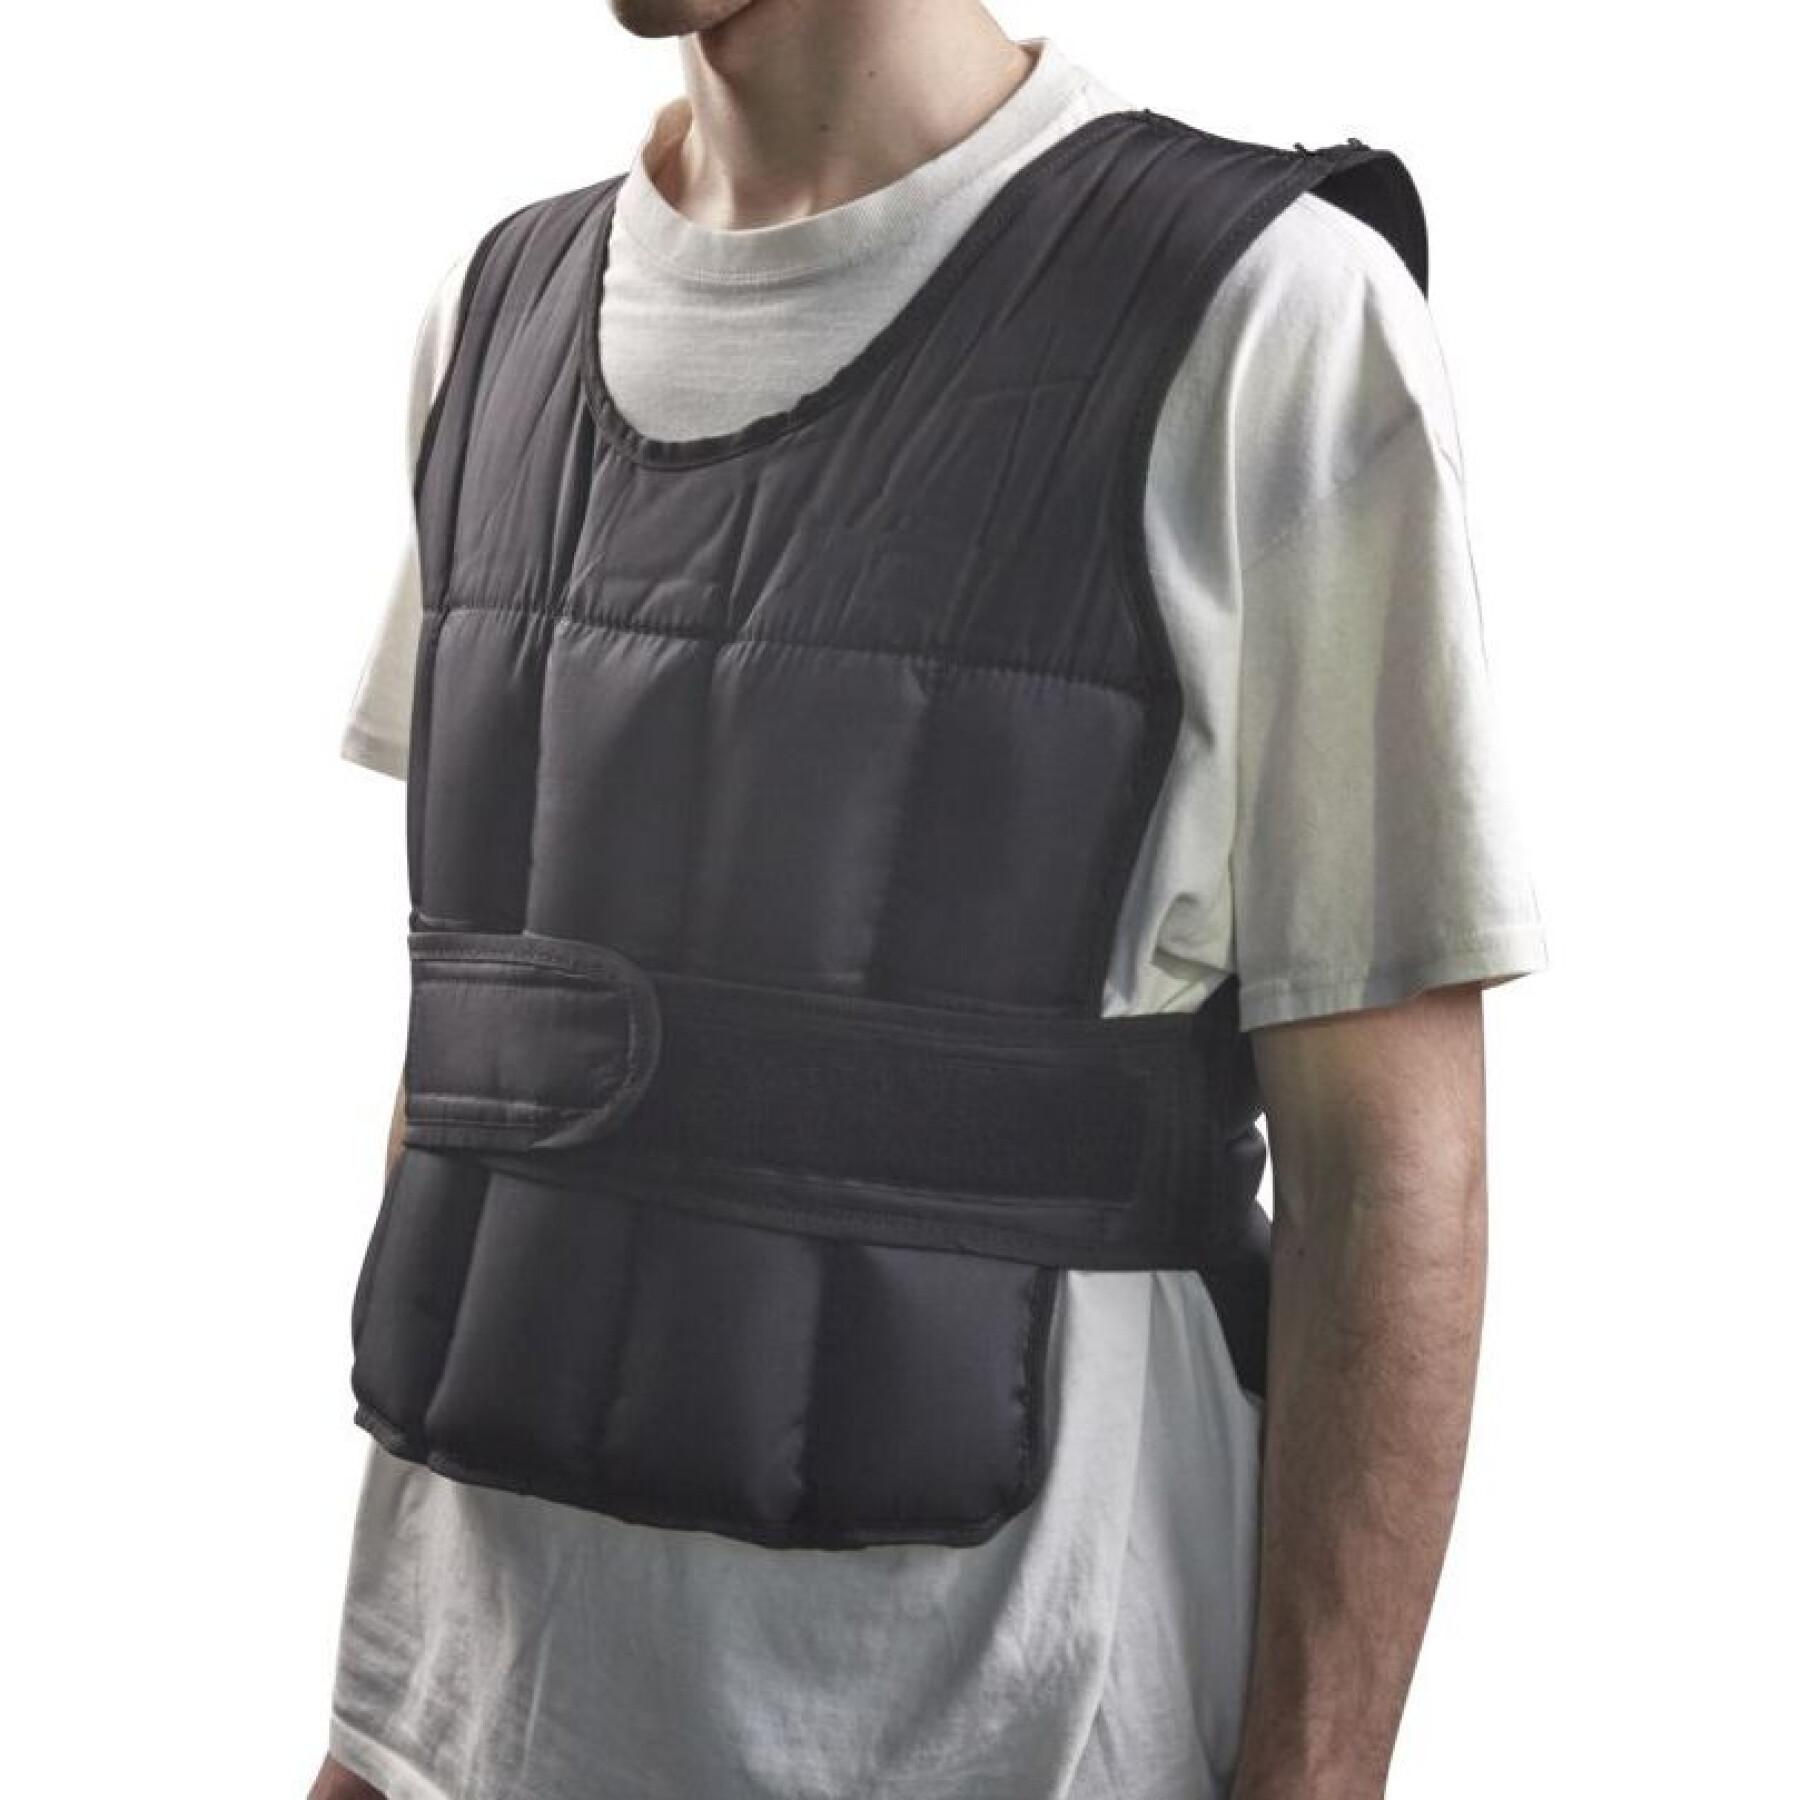 Weighted vest Tanga sports